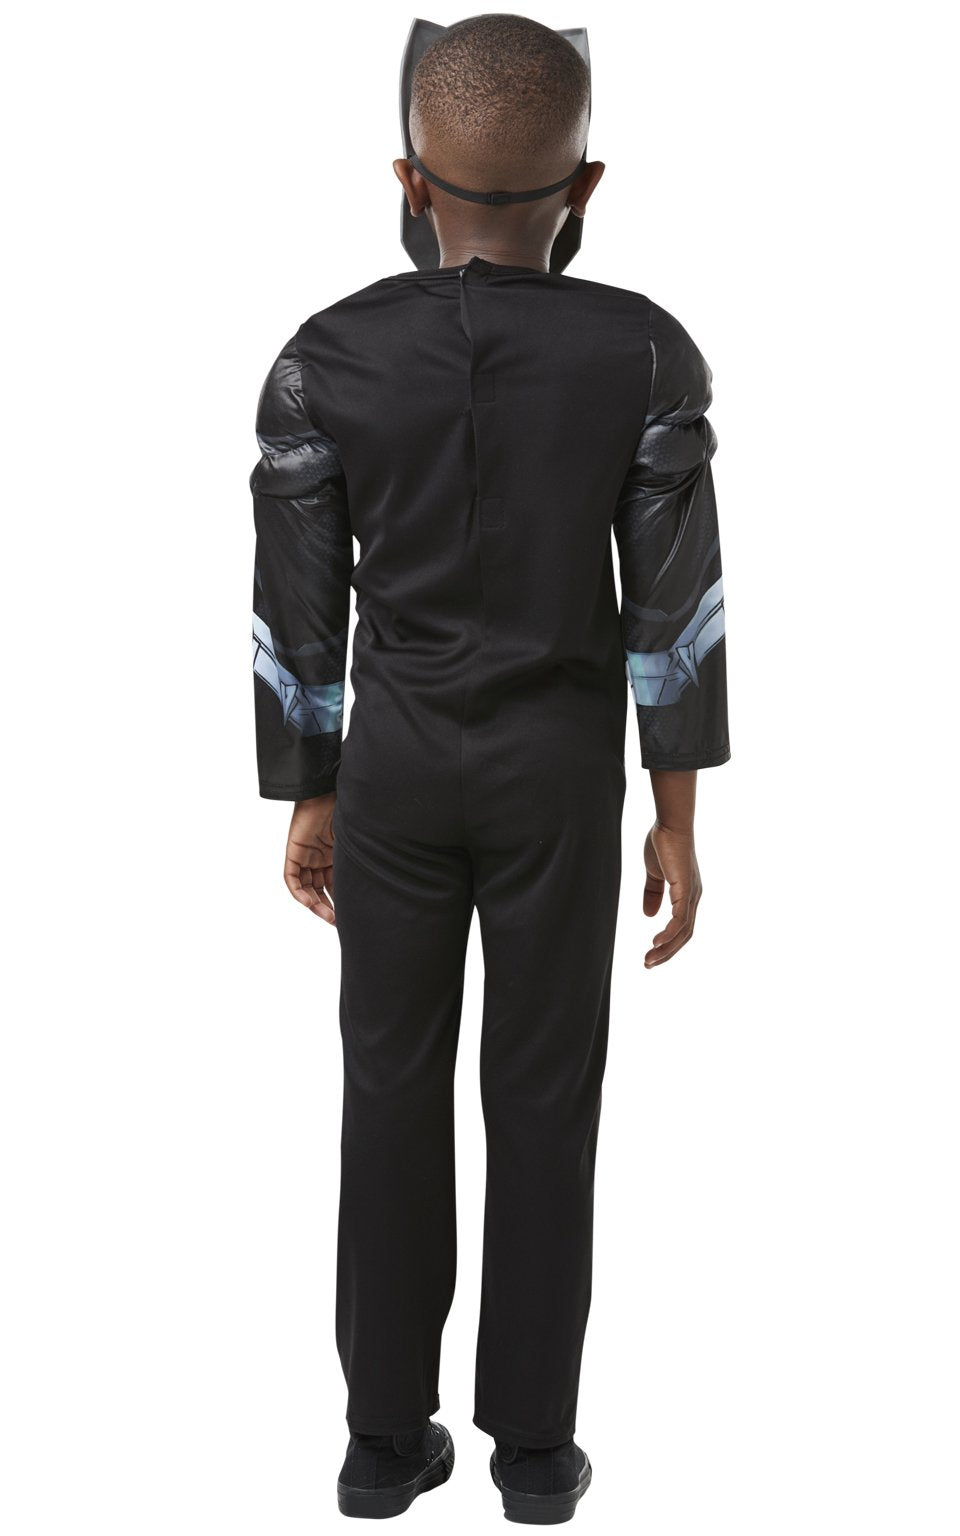 Boys Deluxe Black Panther Costume